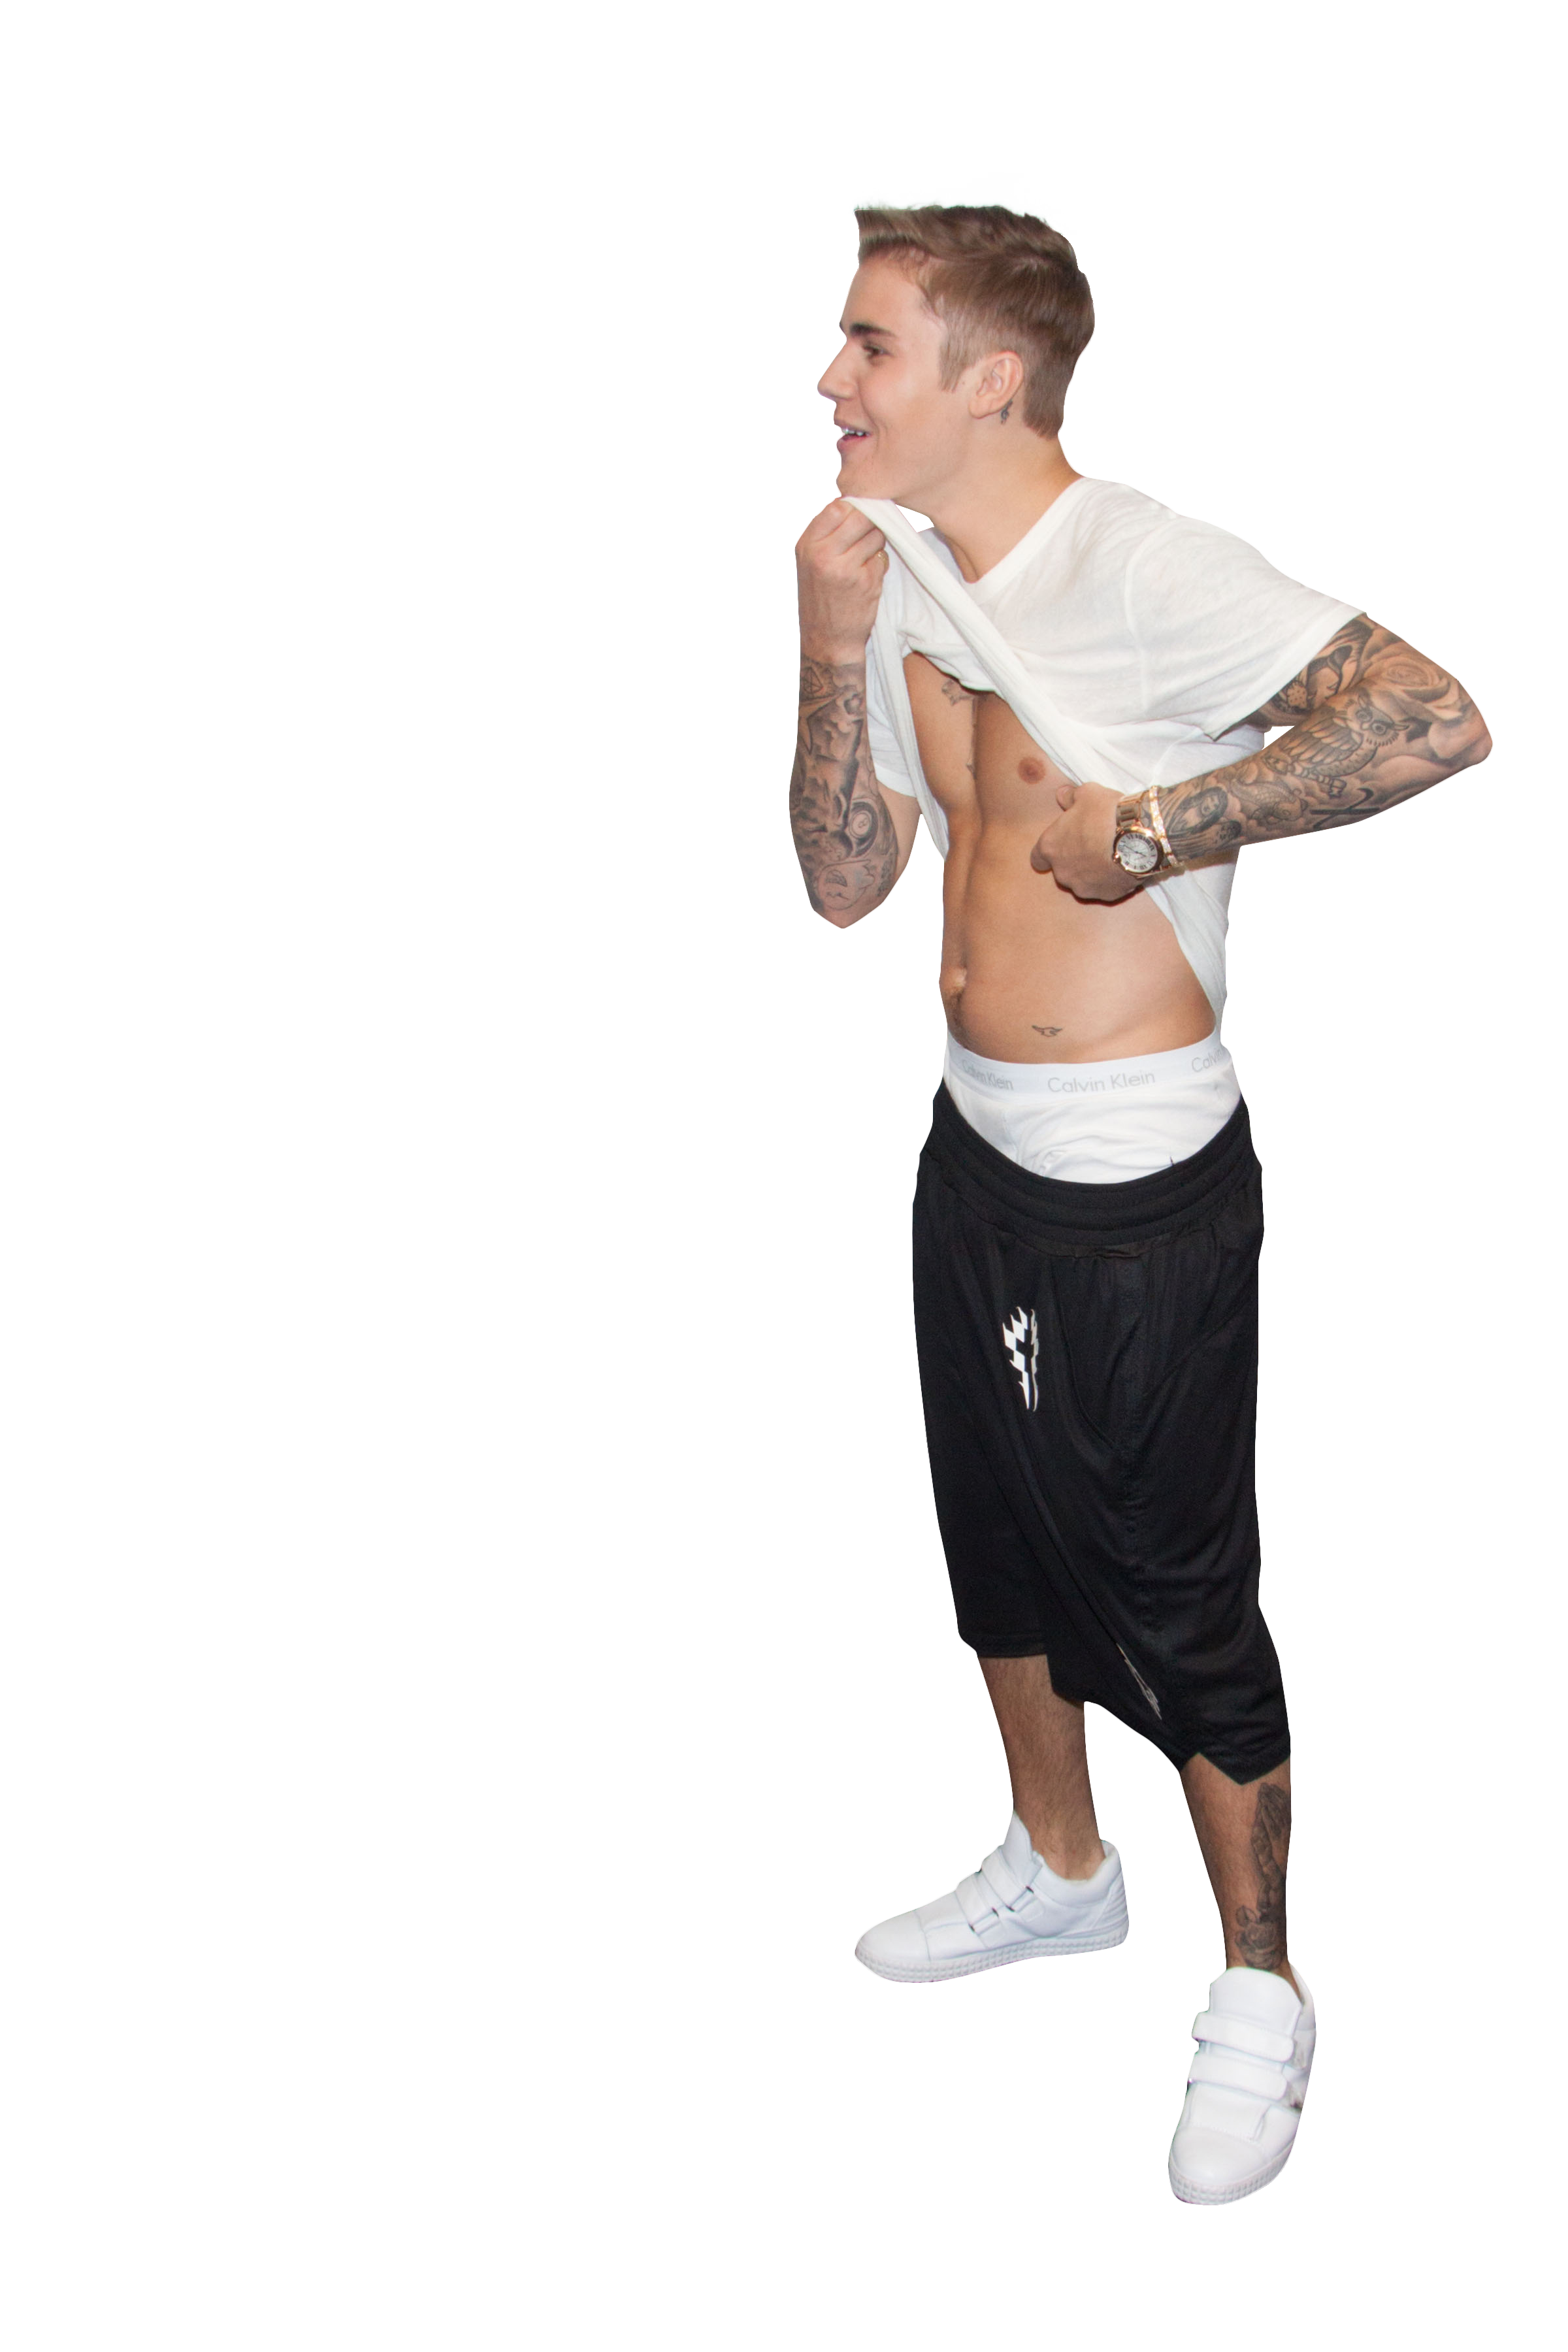 Justin Bieber Showing Sixpack